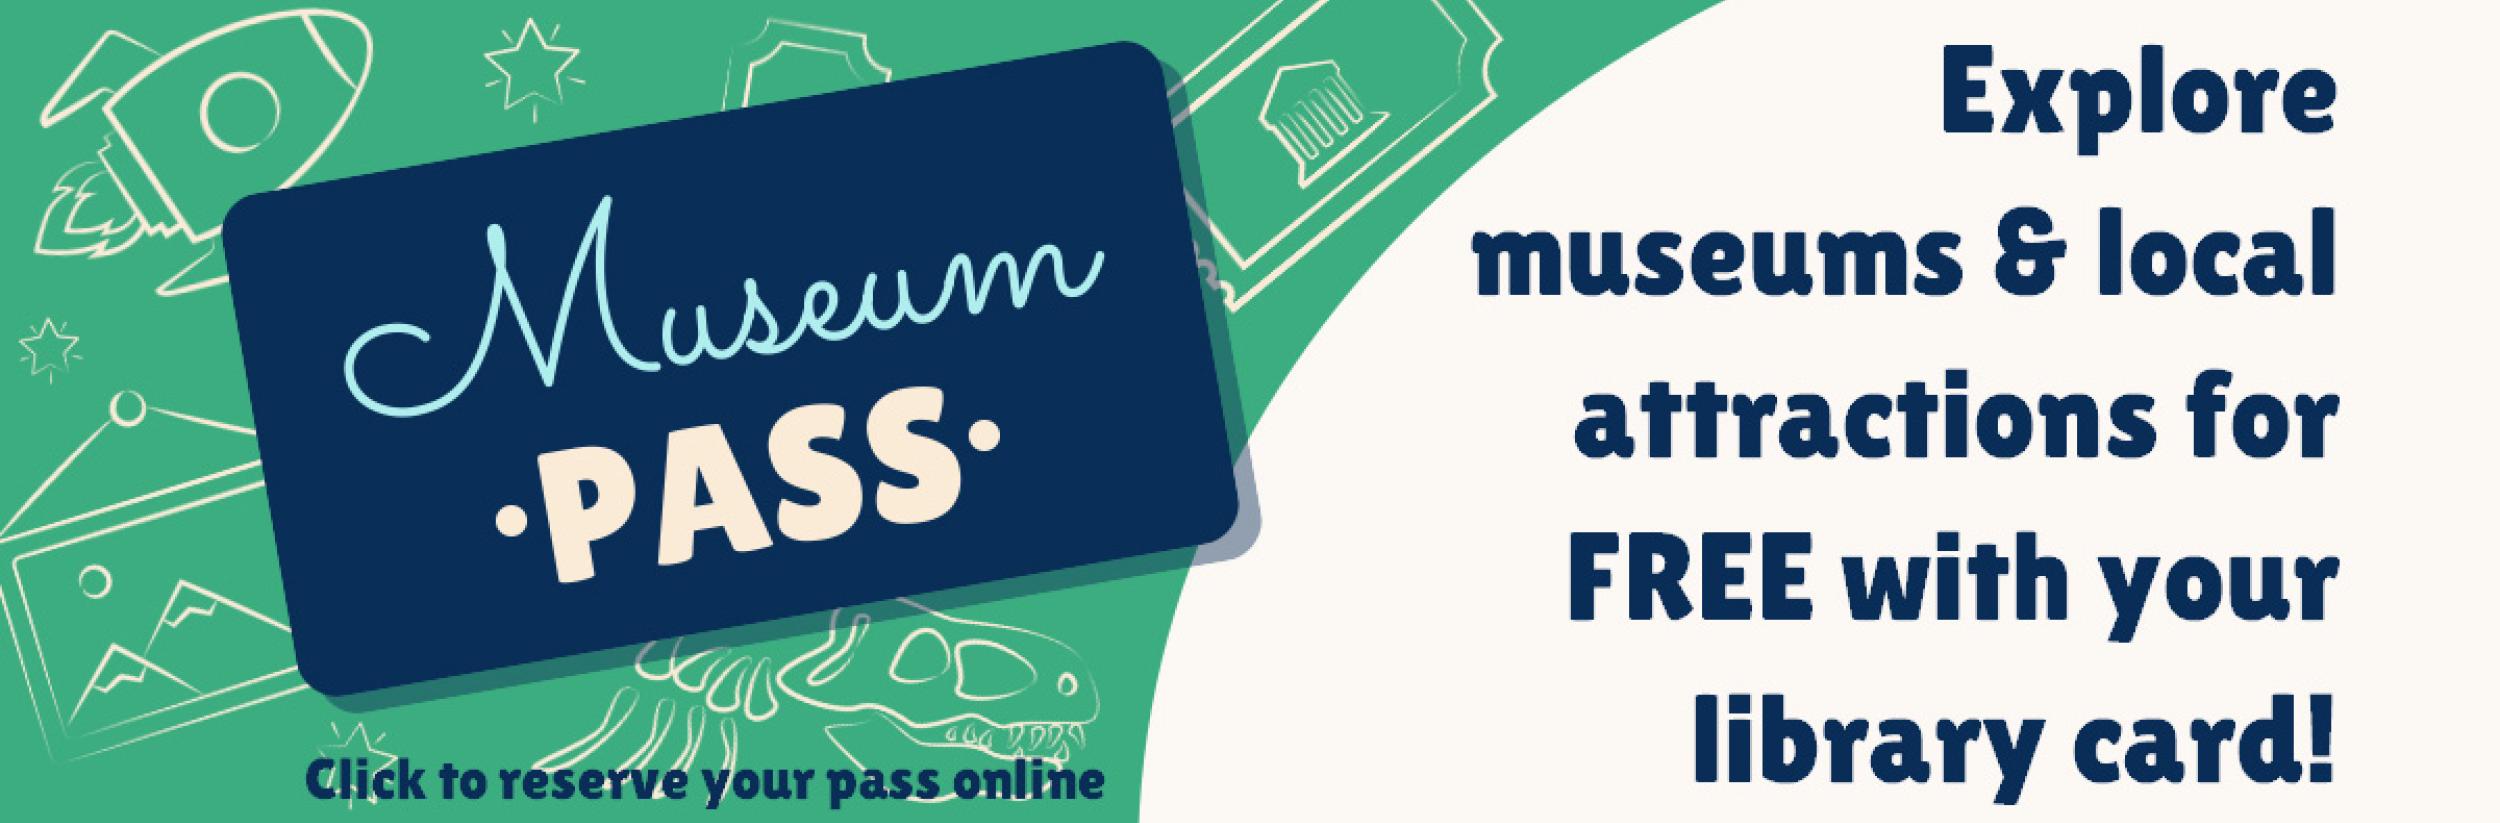 image for "Museum Pass" slide